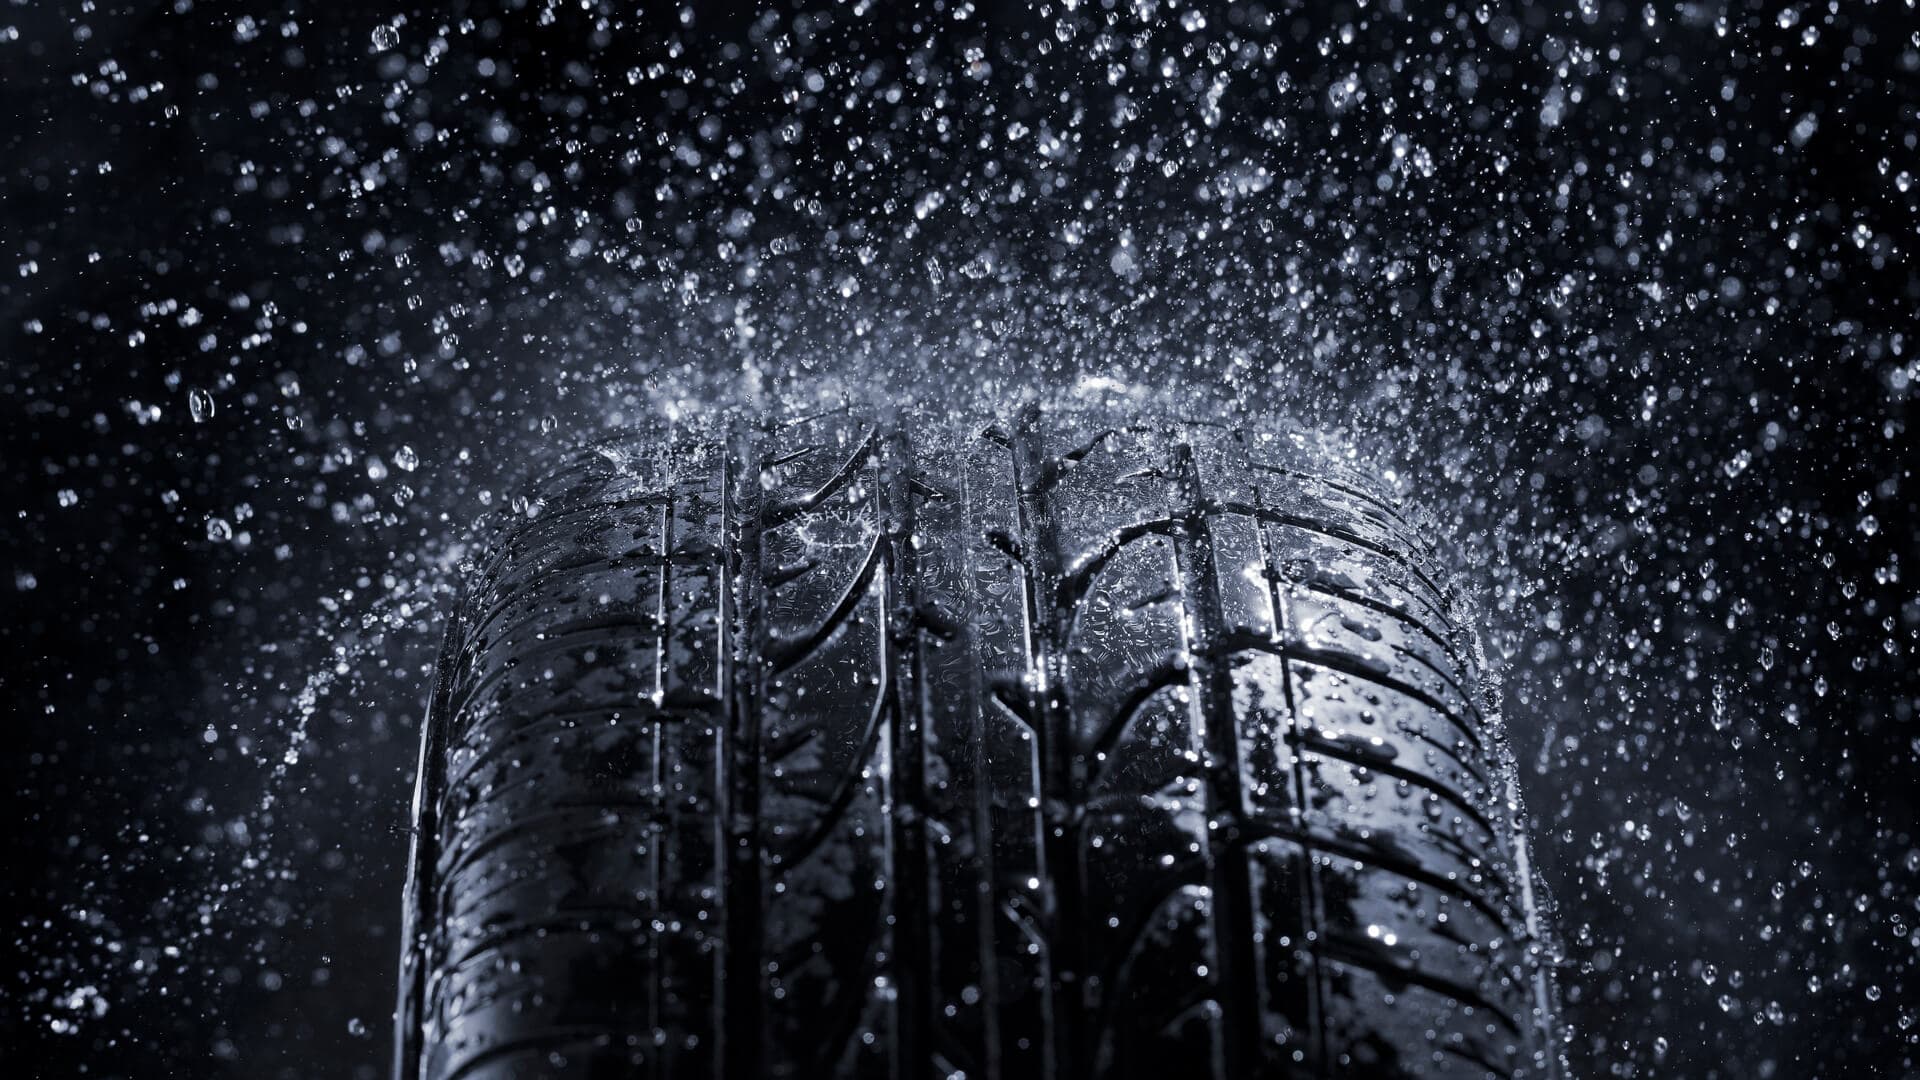 Best Tires for Rain: The Top Tires for Navigating Wet Roads